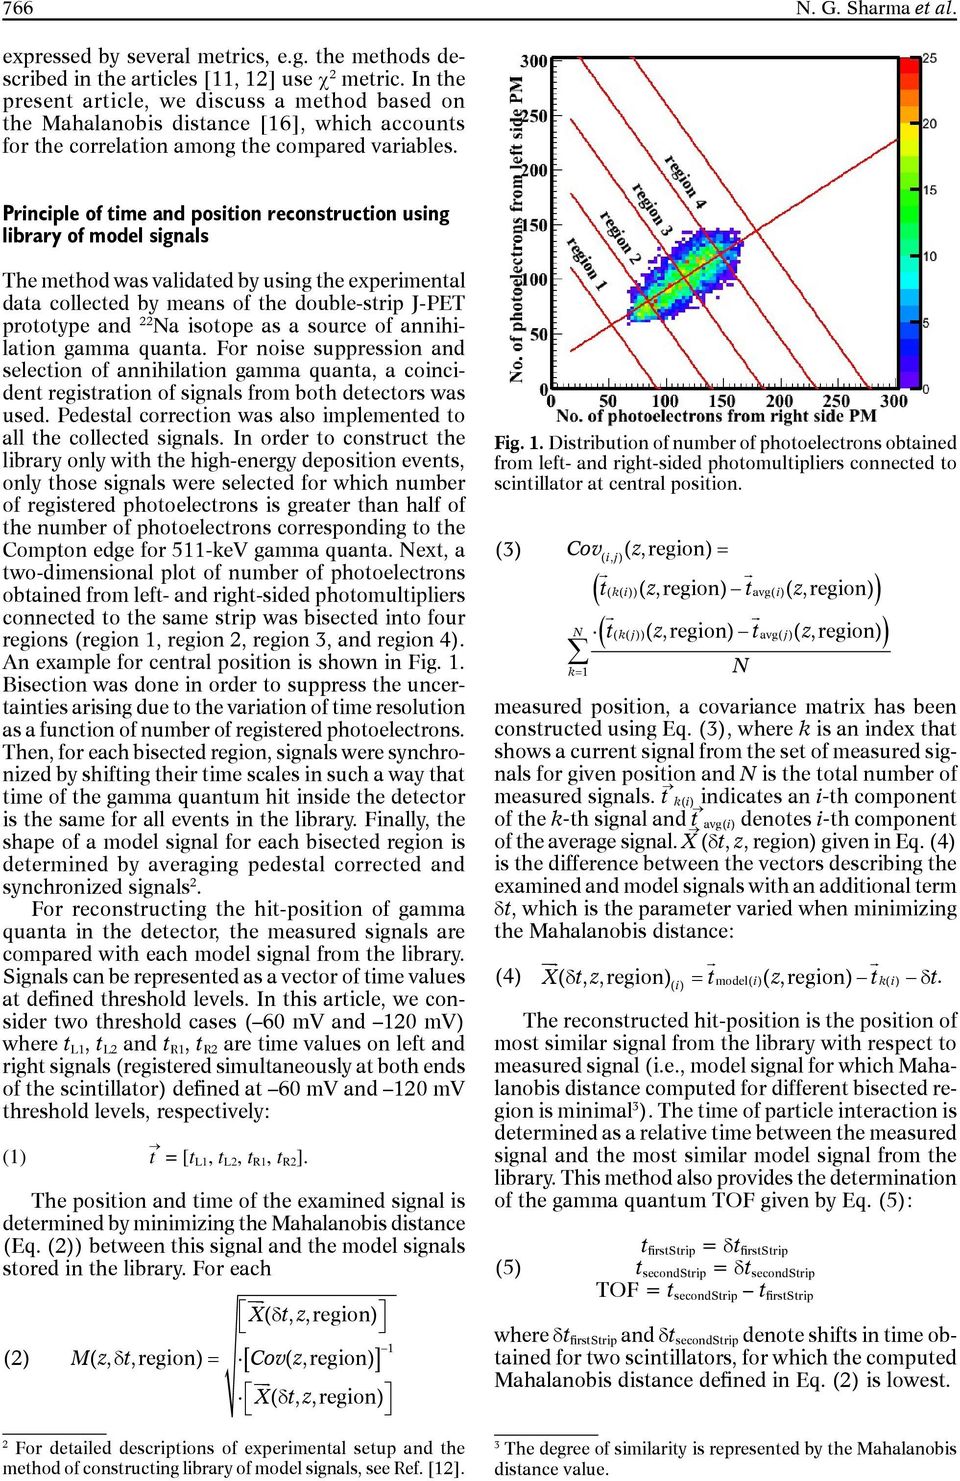 Principle of time and position reconstruction using library of model signals The method was validated by using the experimental data collected by means of the double-strip J-PET prototype and 22 Na